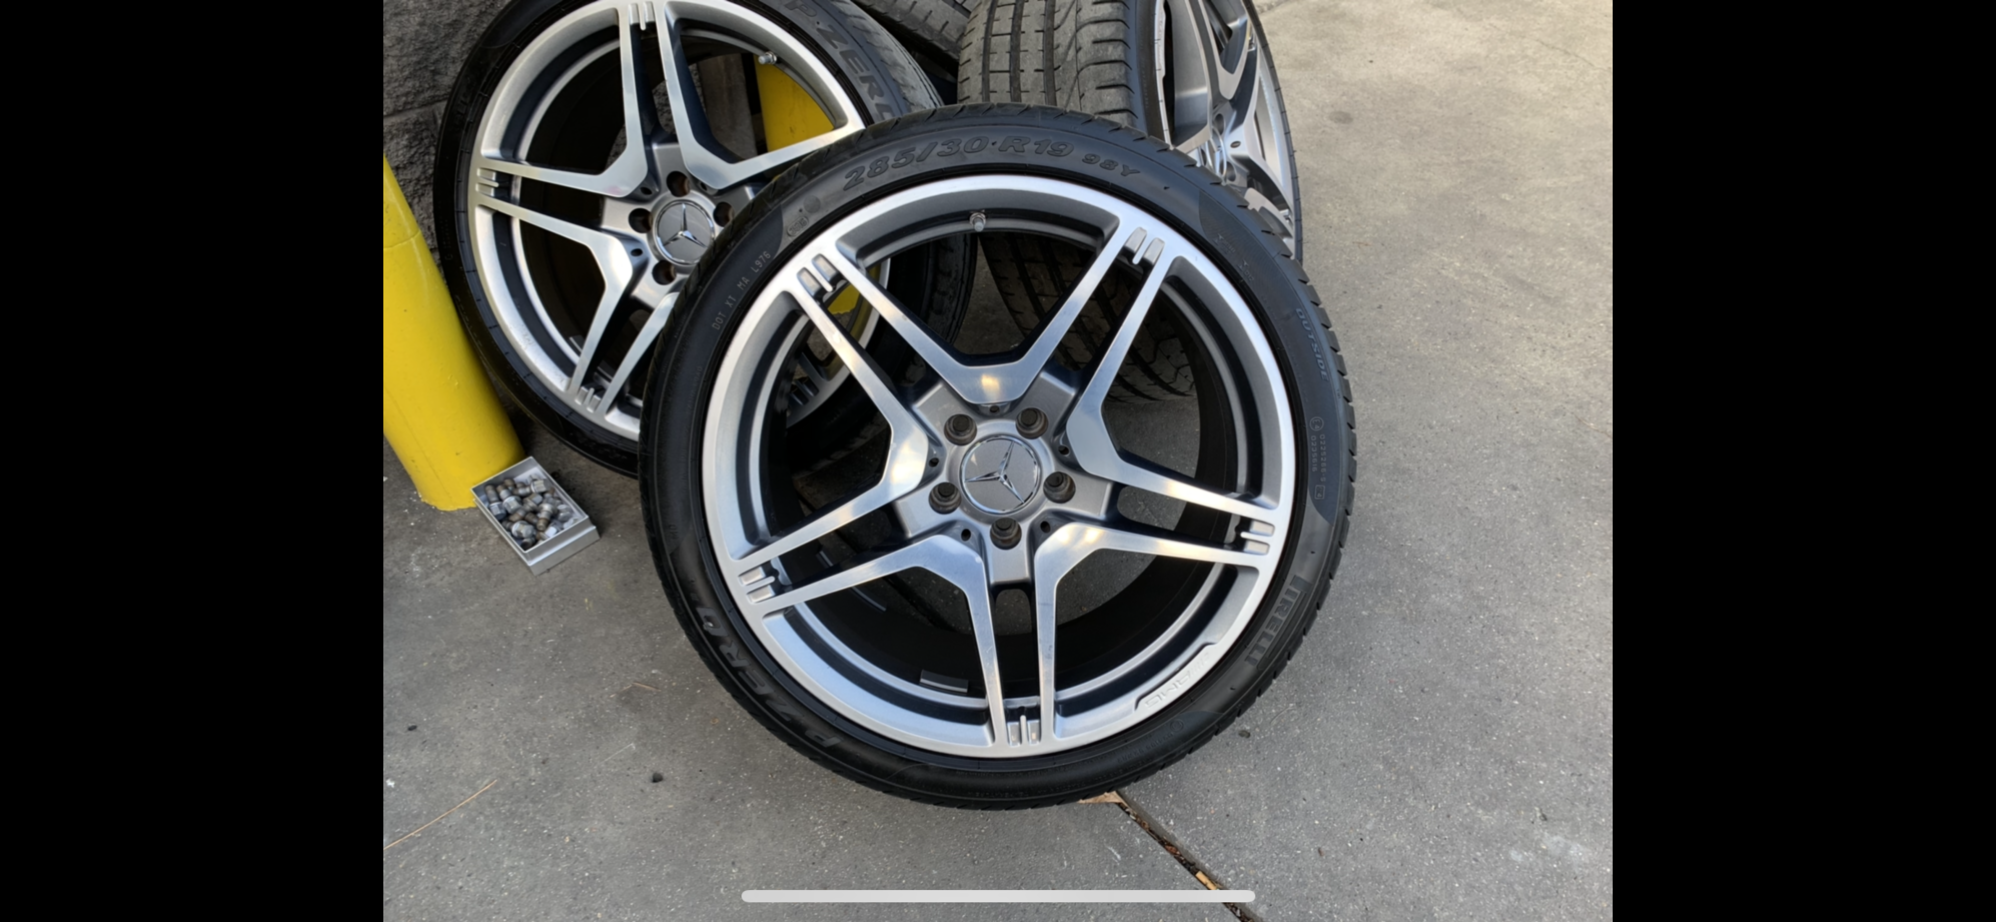 Wheels and Tires/Axles - 2013 E63 Performace Package Wheels (OEM Genuine ) - Used - 2010 to 2014 Mercedes-Benz E63 AMG - Birmingham, AL 35217, United States